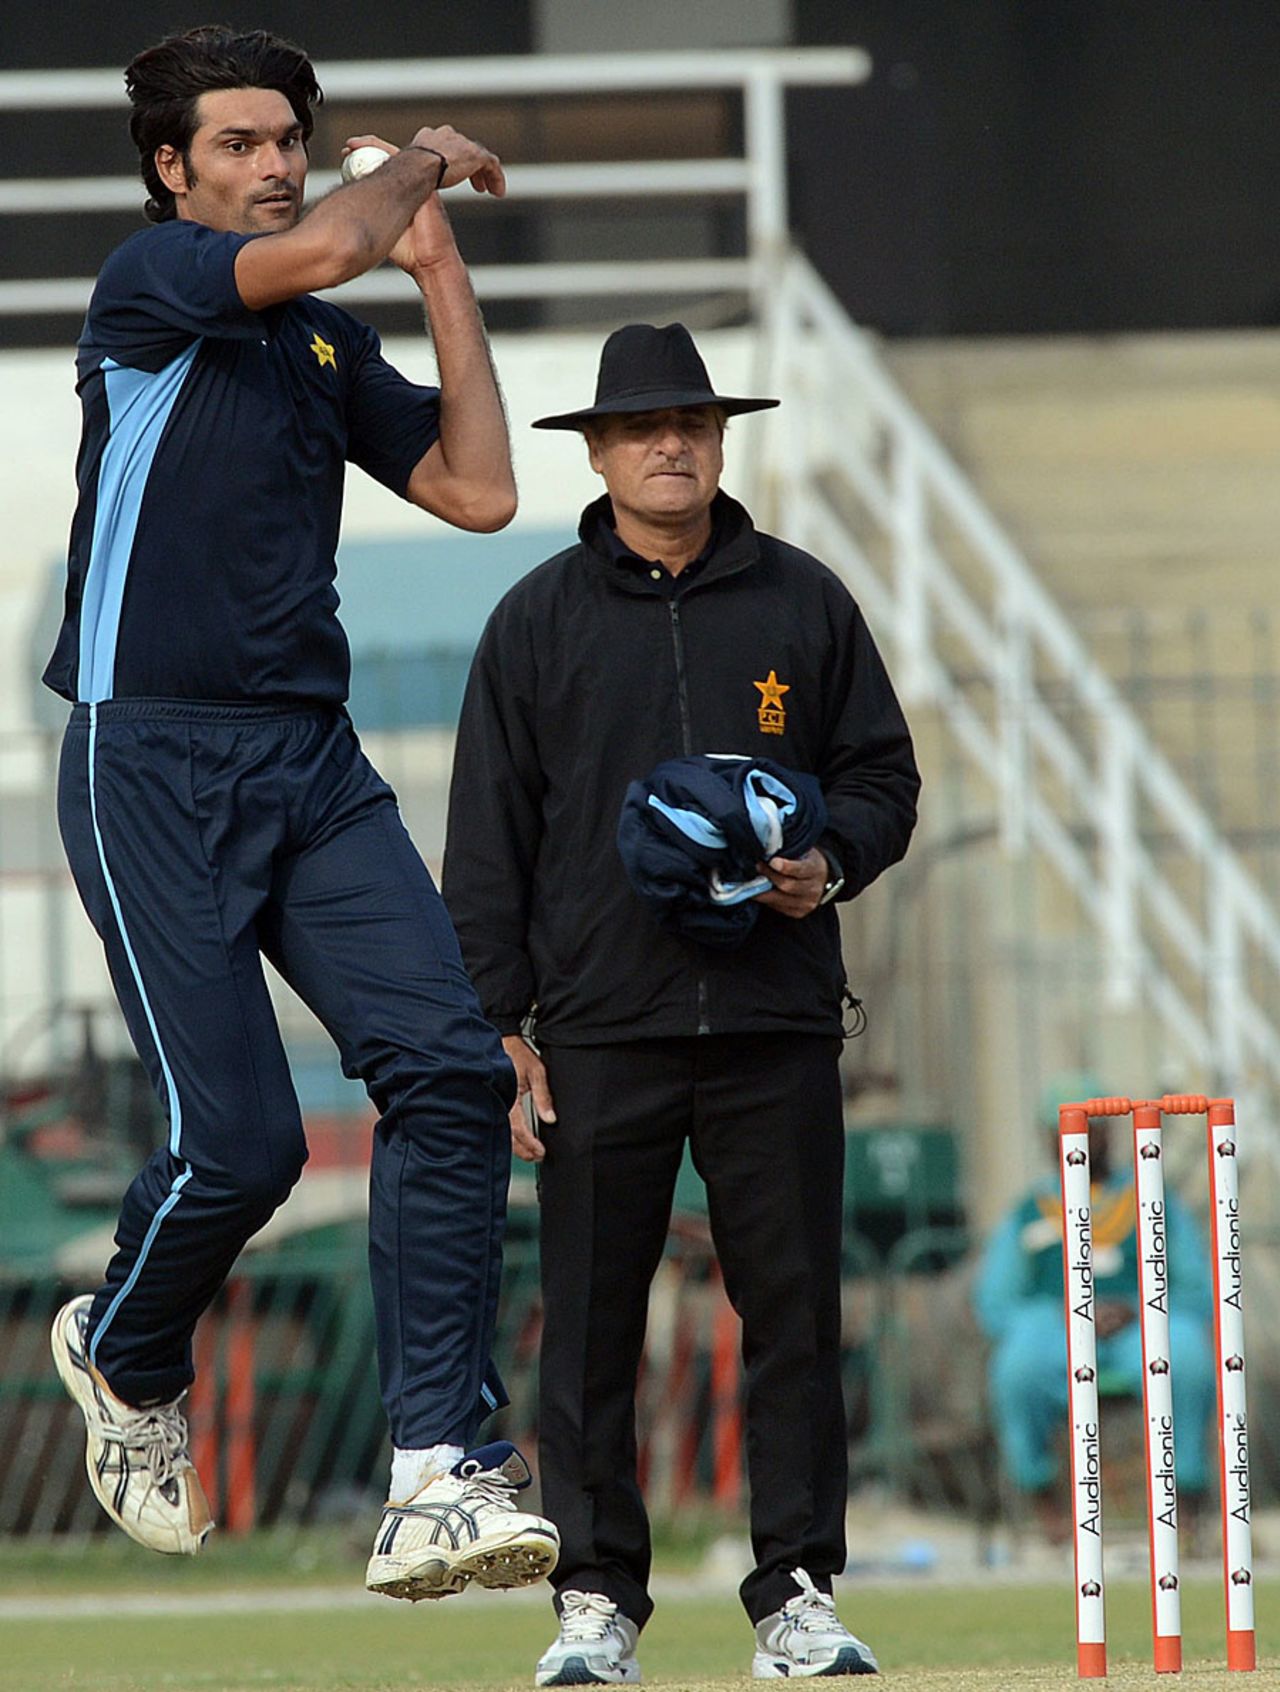 Pakistan fast bowler Mohammad Irfan bowls in a practice session, Lahore, December 17, 2012